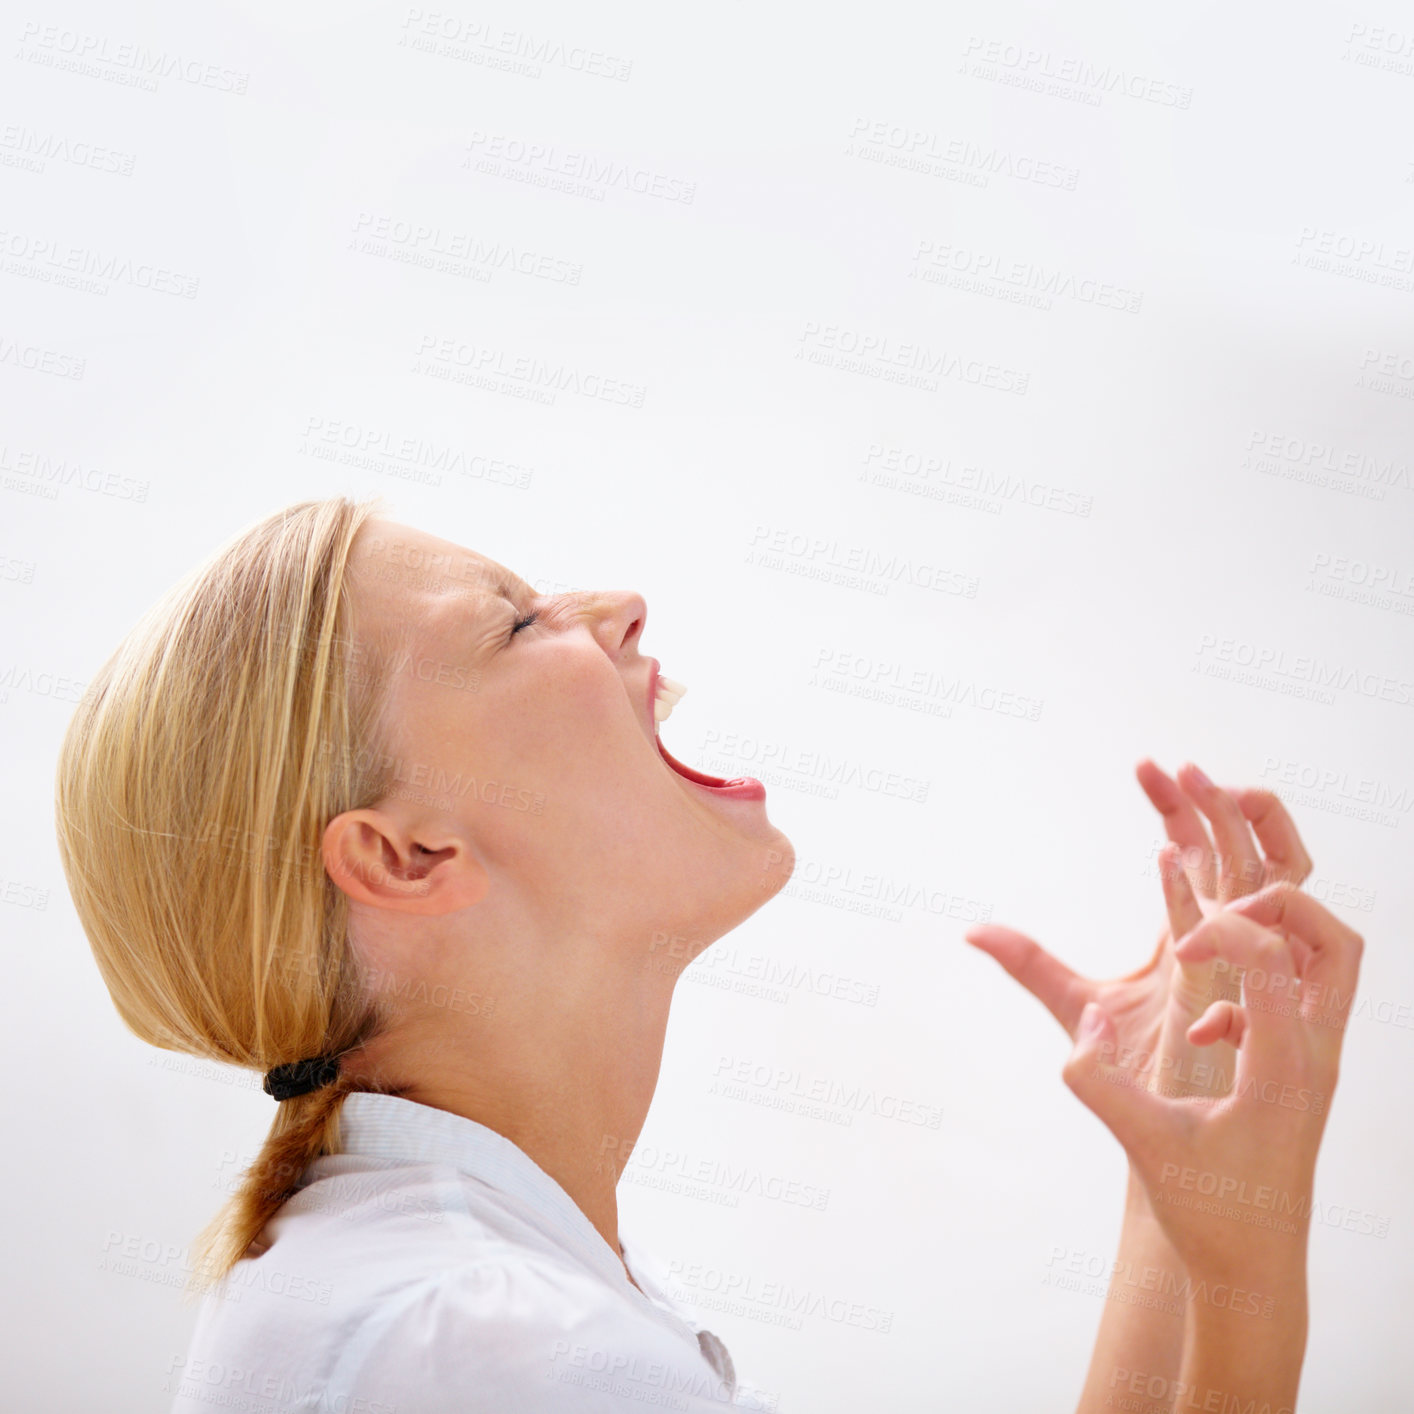 Buy stock photo Profile shot of a young woman screaming loudly at copy space